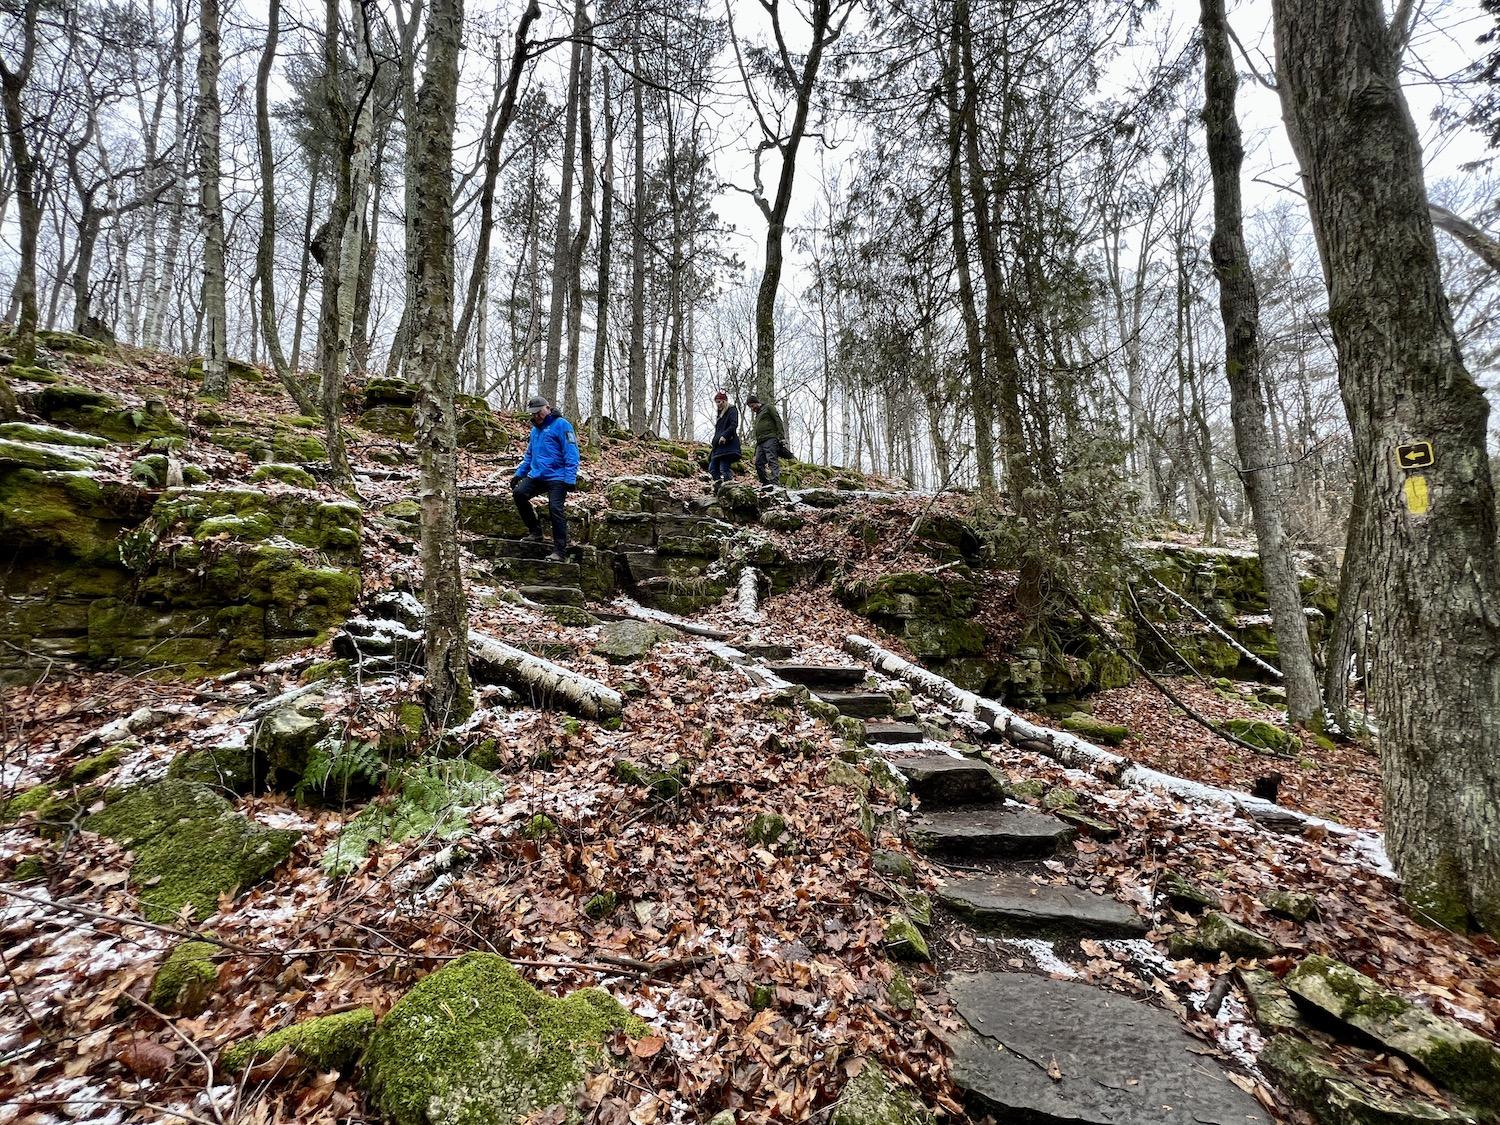 Volunteers added these rock steps to the Ice Age National Scenic Trail in Potawatomi State Park.